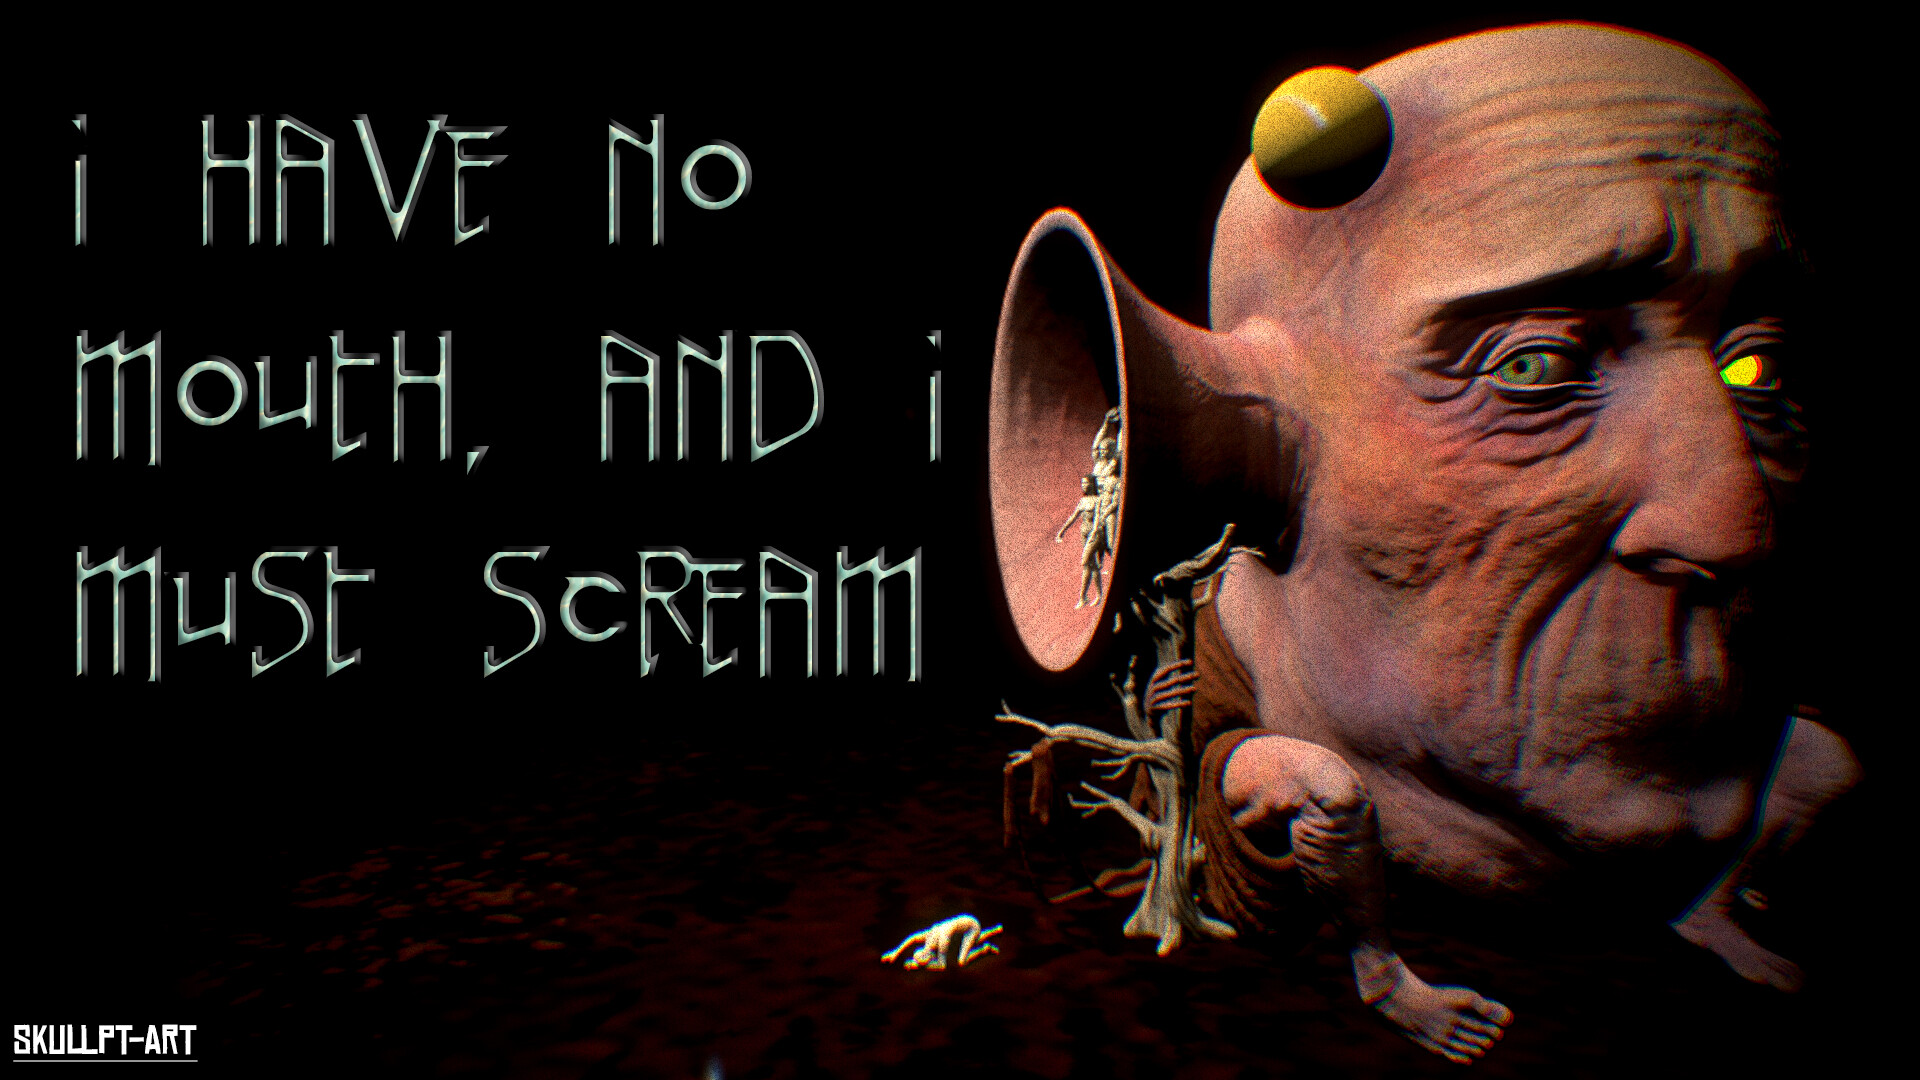 In GOG New Year's distributions! You can now pick up I Have No Mouth And I Must Scream